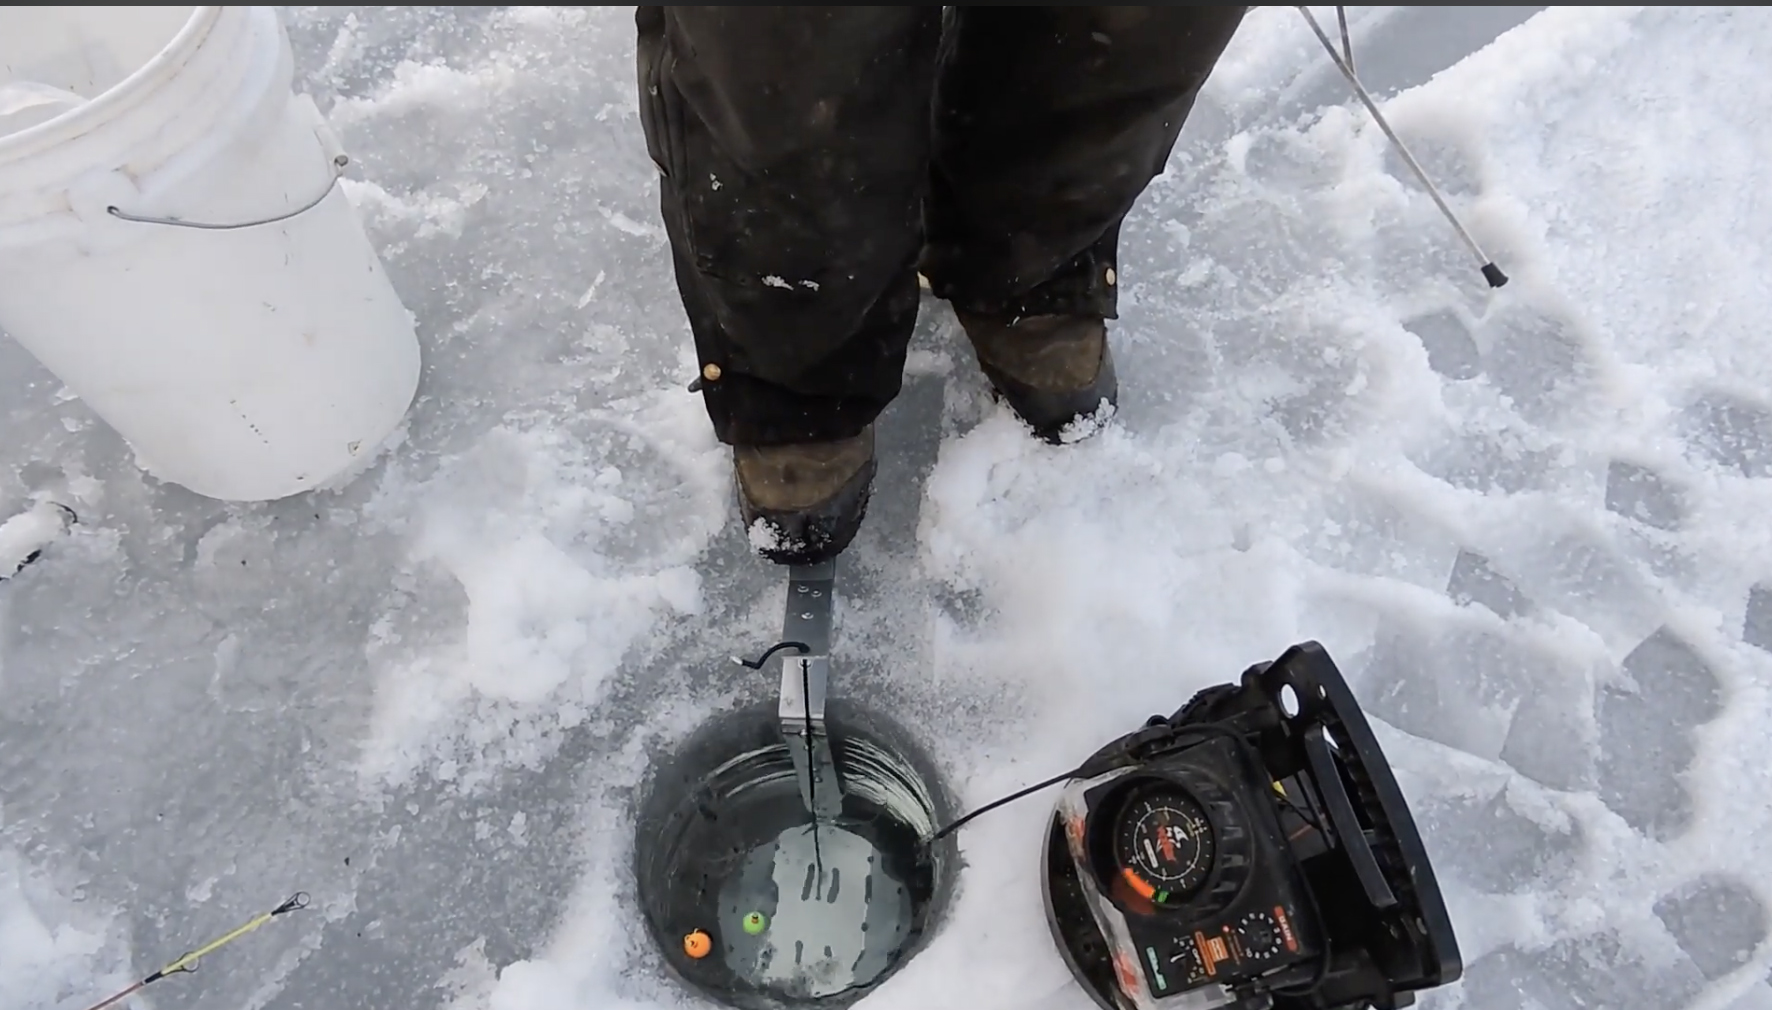 Introducing Grandpa Jimmy’s Ice Hole Trap ... Yet Another New Ice Fishing Gadget